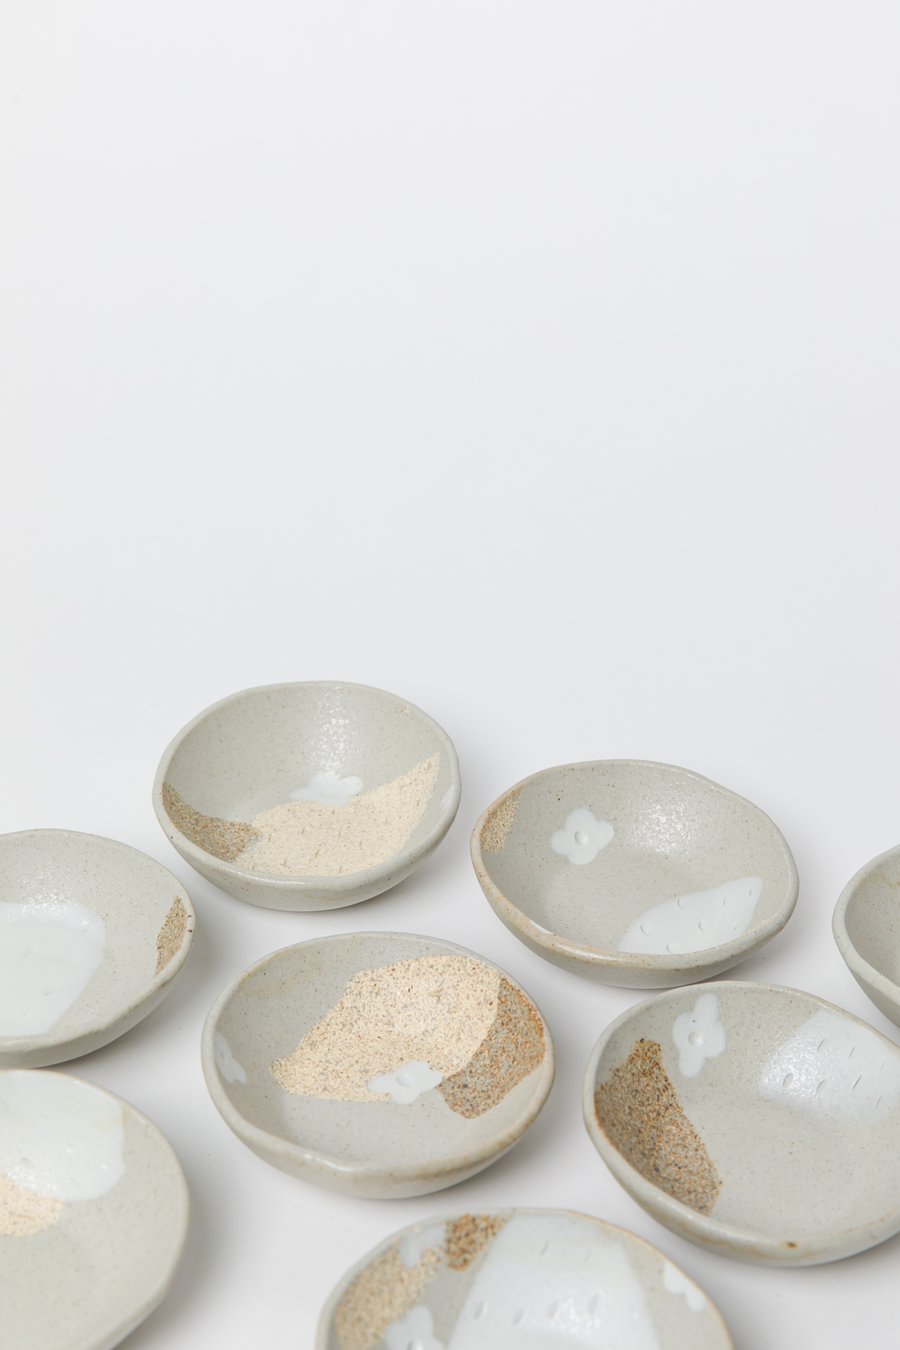 Image of Little spice / salt dishes - Beige with white flowers